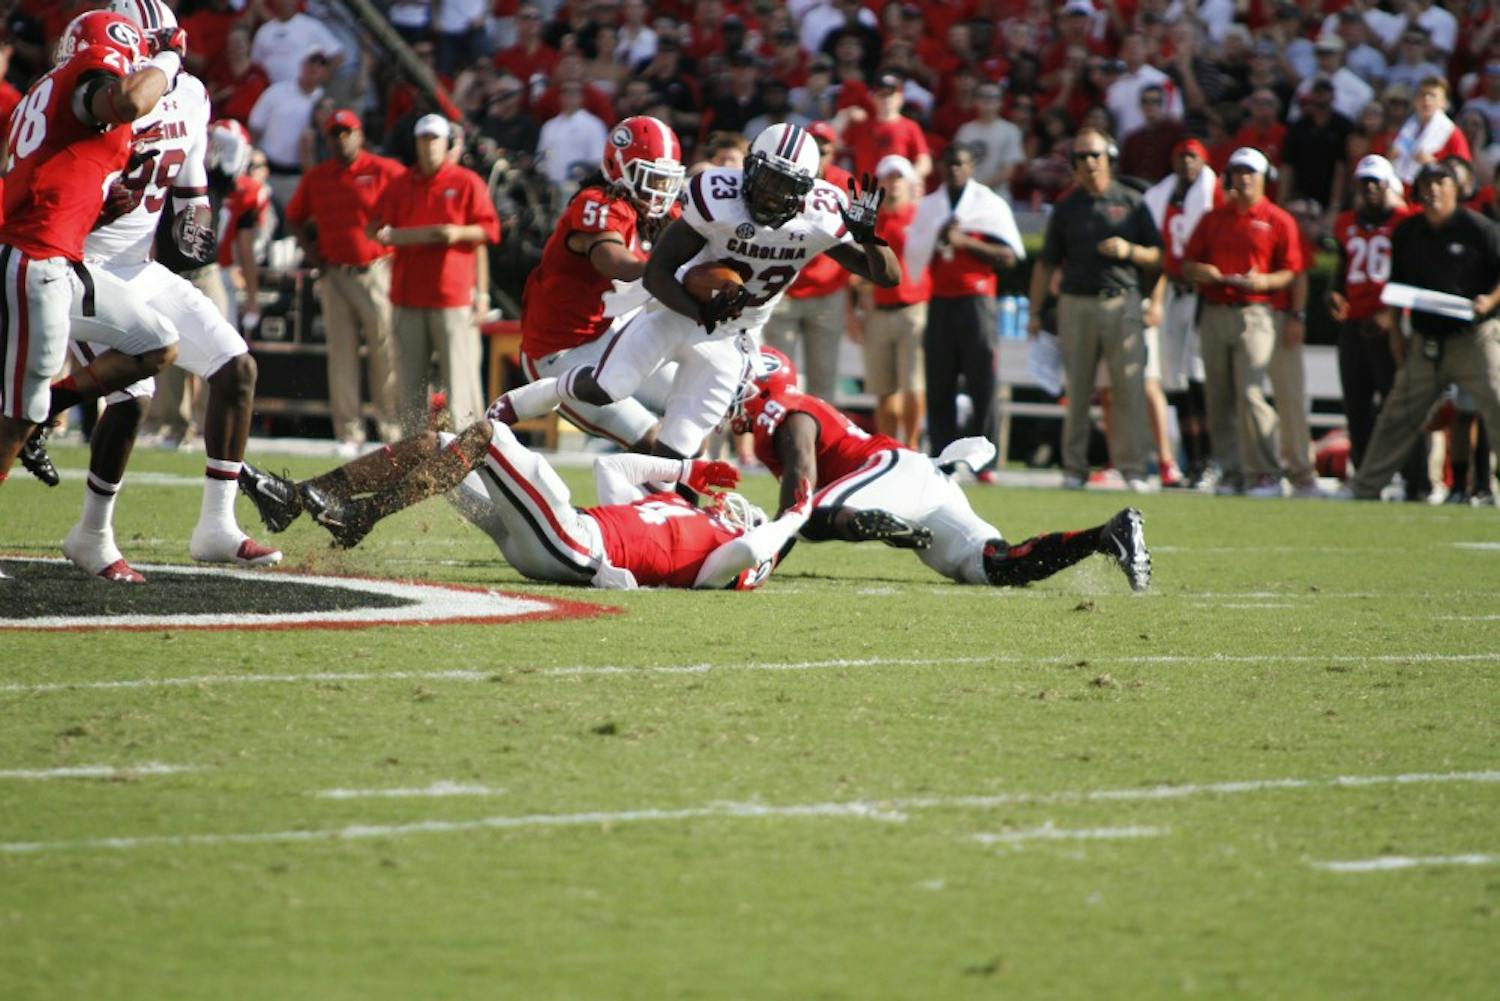 	South Carolina wide receiver Bruce Ellington is tackled near the 50-yard line.